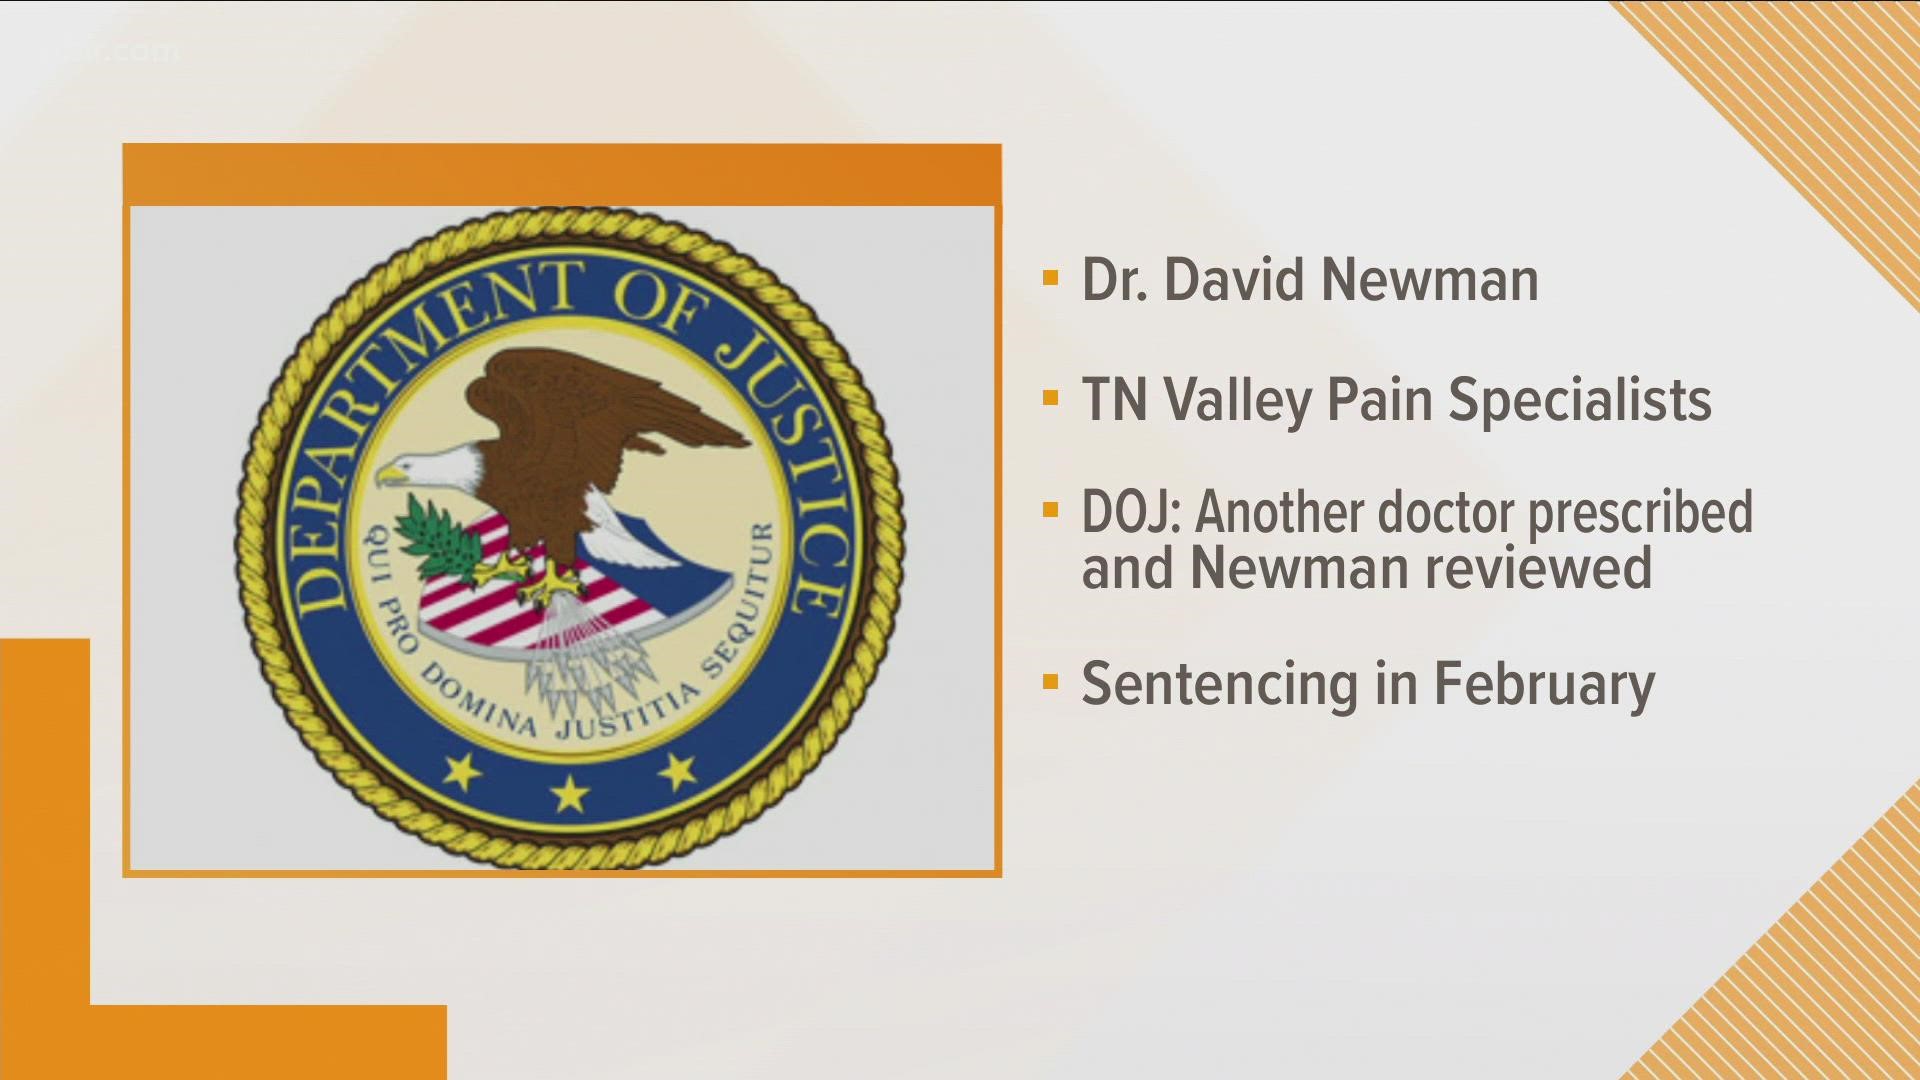 The Department of Justice says Mynatt prescribed larges doses of pain medication to patients.